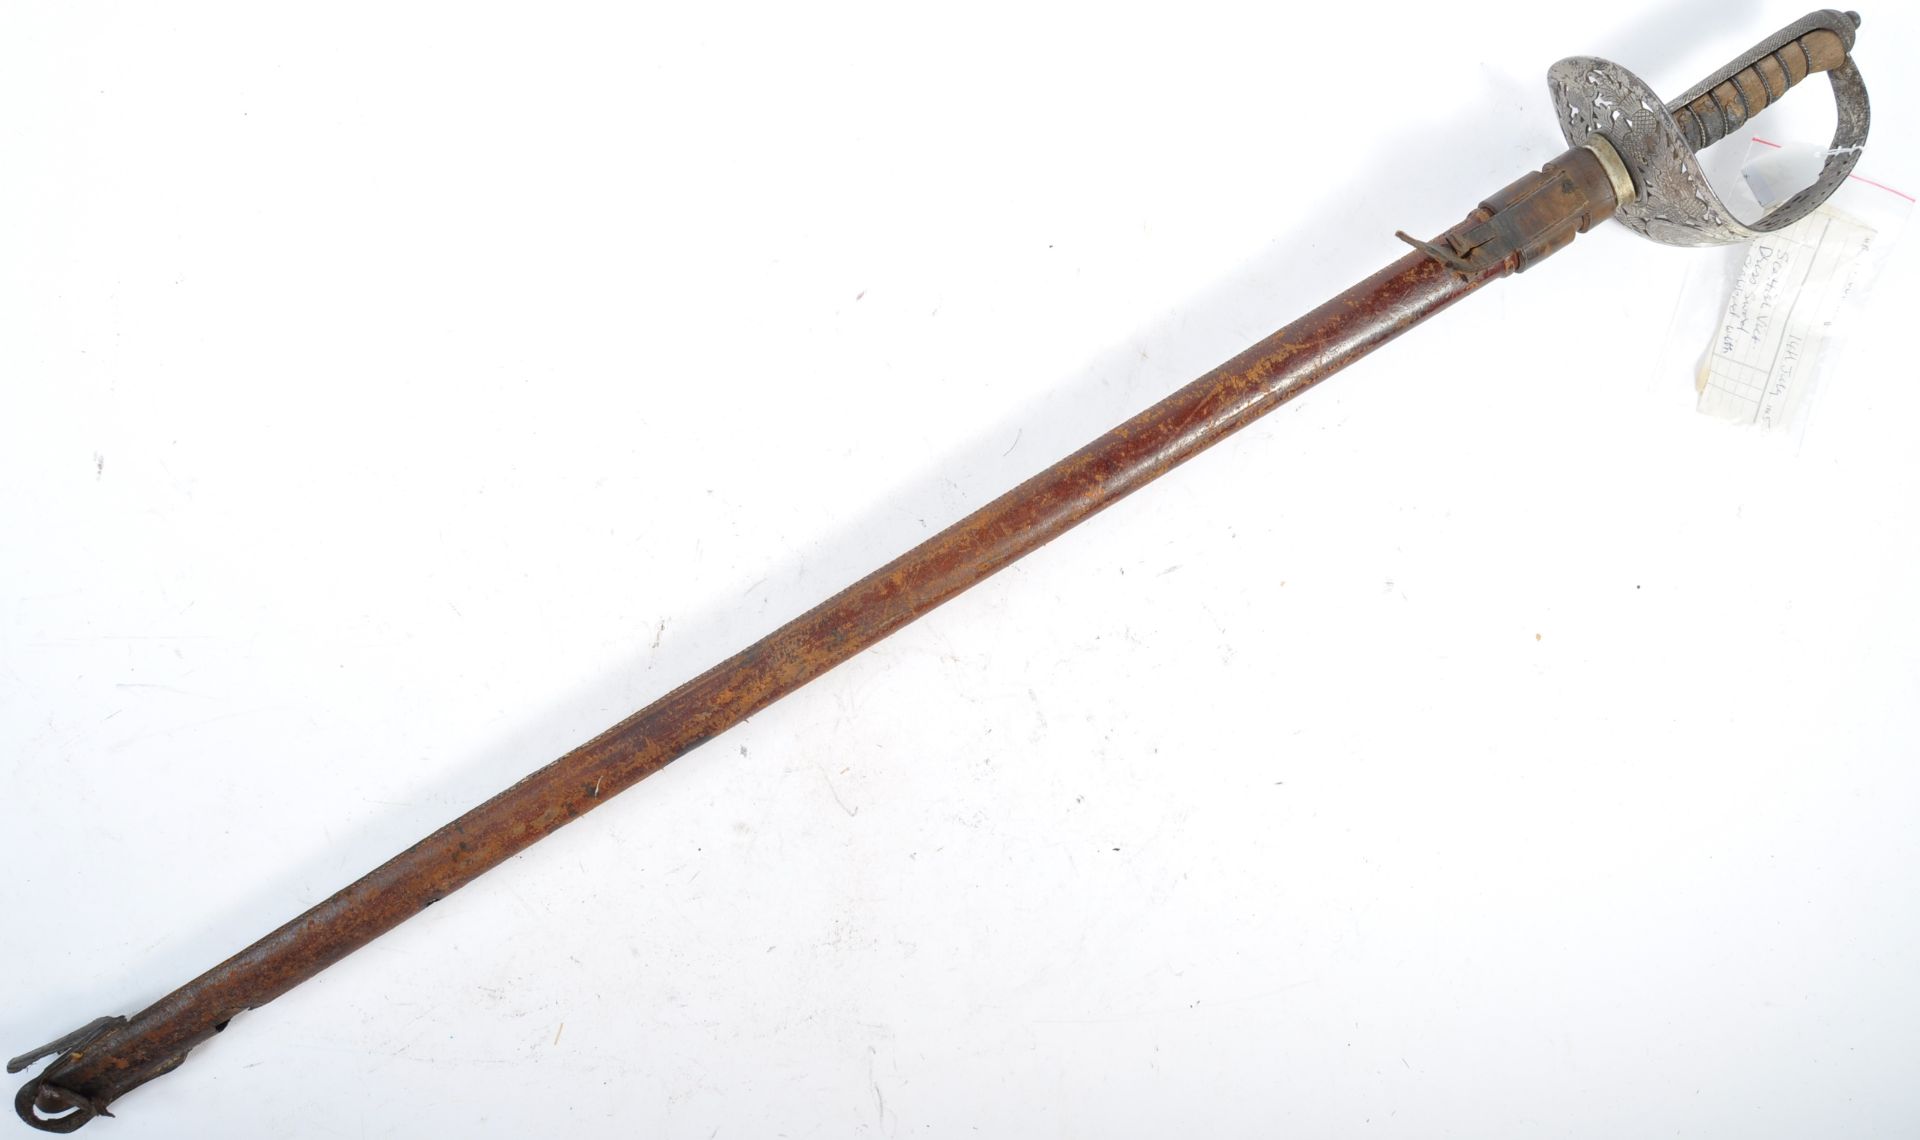 UNUSUAL 19TH CENTURY SCOTTISH OFFICERS SWORD WITH TOLEDO BLADE - Image 8 of 8